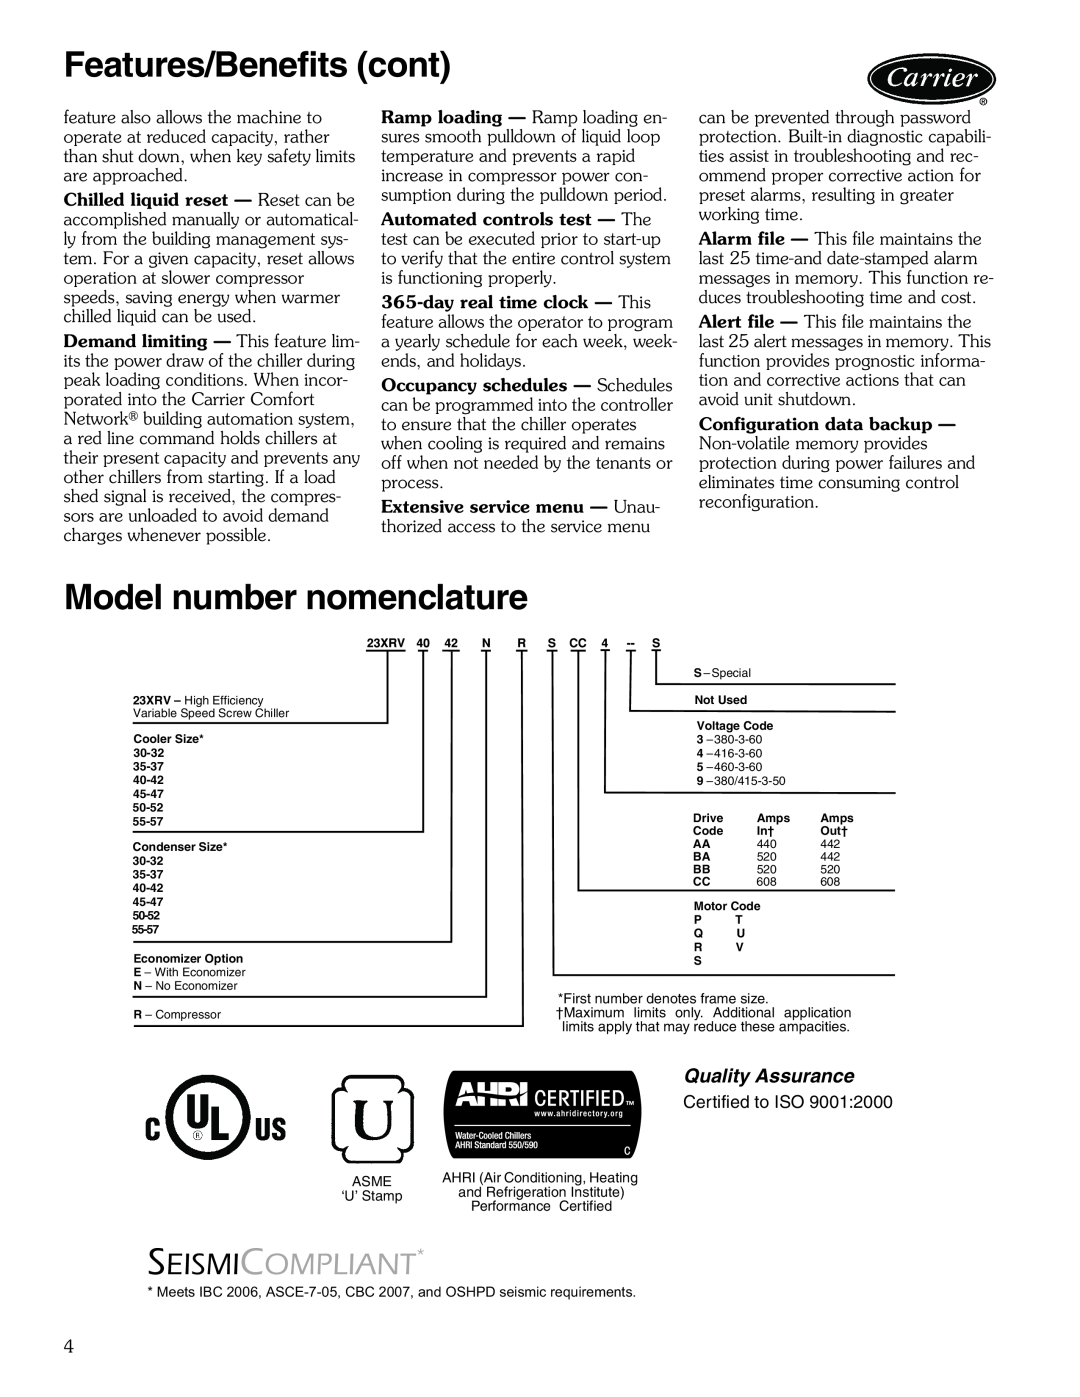 Carrier 23XRV manual Model number nomenclature, Features/Benefits cont, Seismicompliant, Quality Assurance, a23-1648 